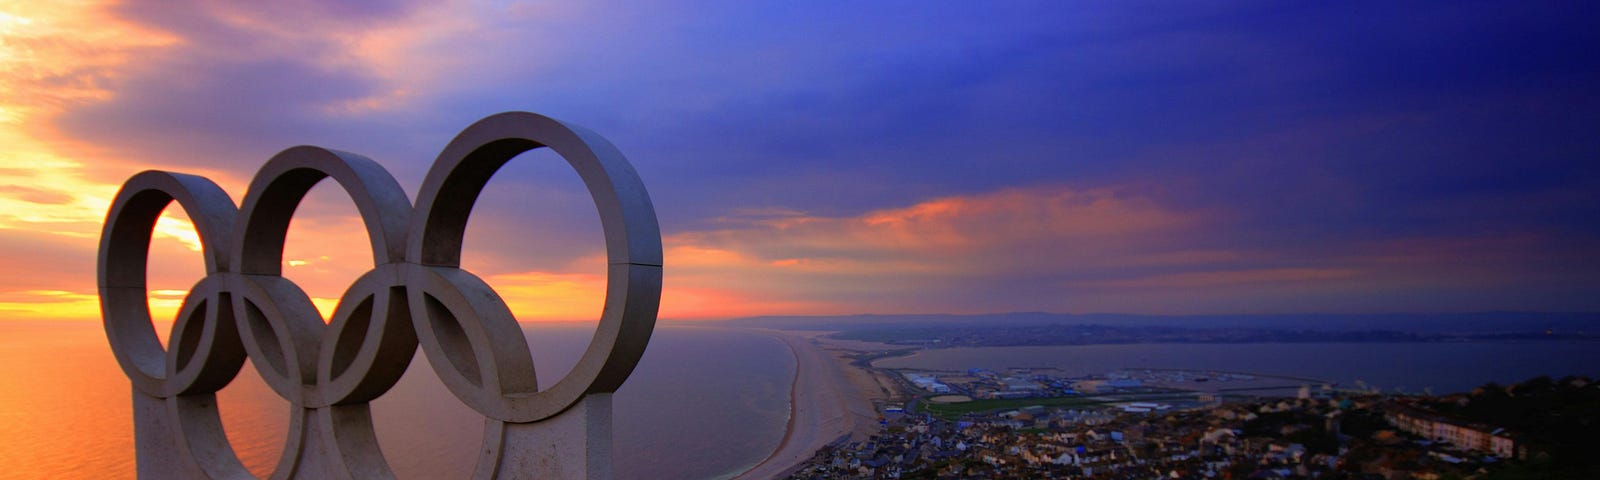 Scenic view of Olympic rings overlooking the sunset